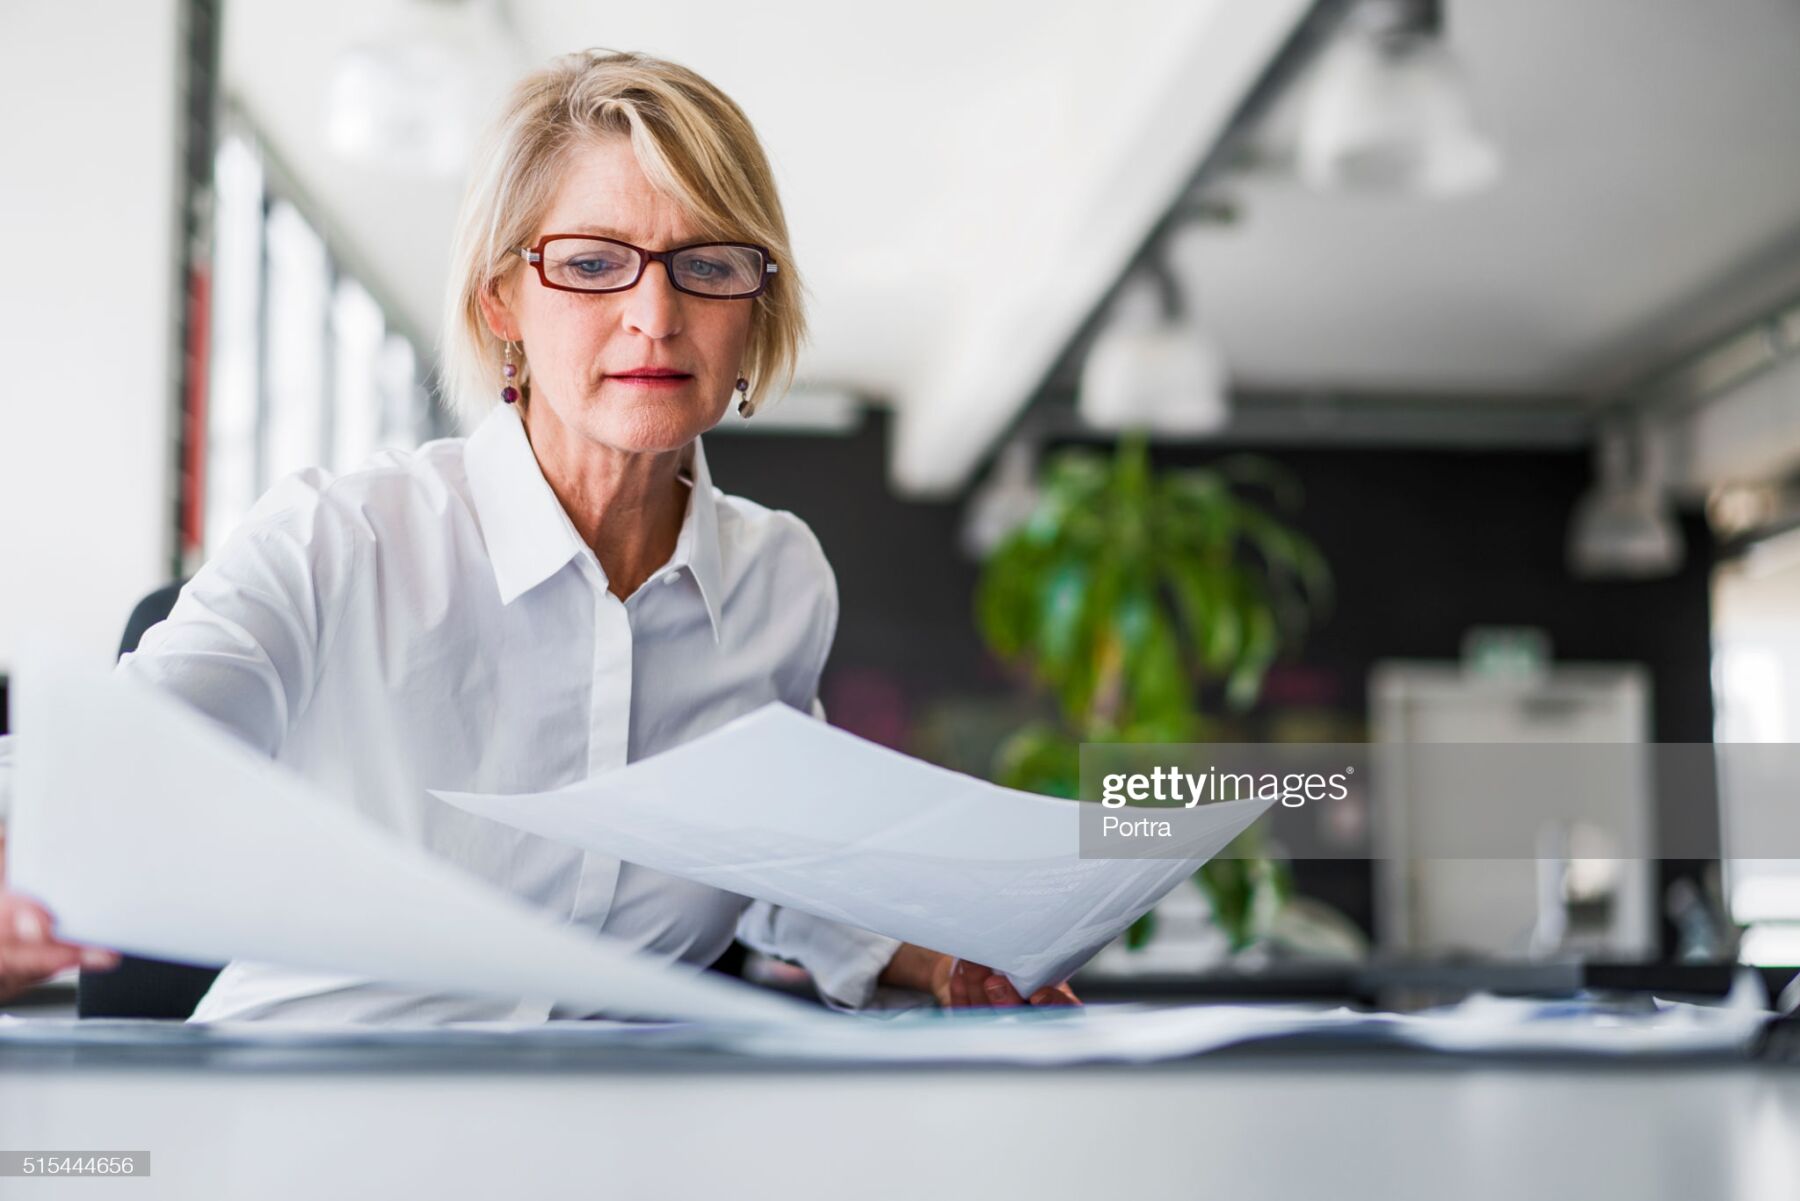 A photo of mature businesswoman examining documents at desk. Concentrated professional is analysing papers in office. Executive is in formals.